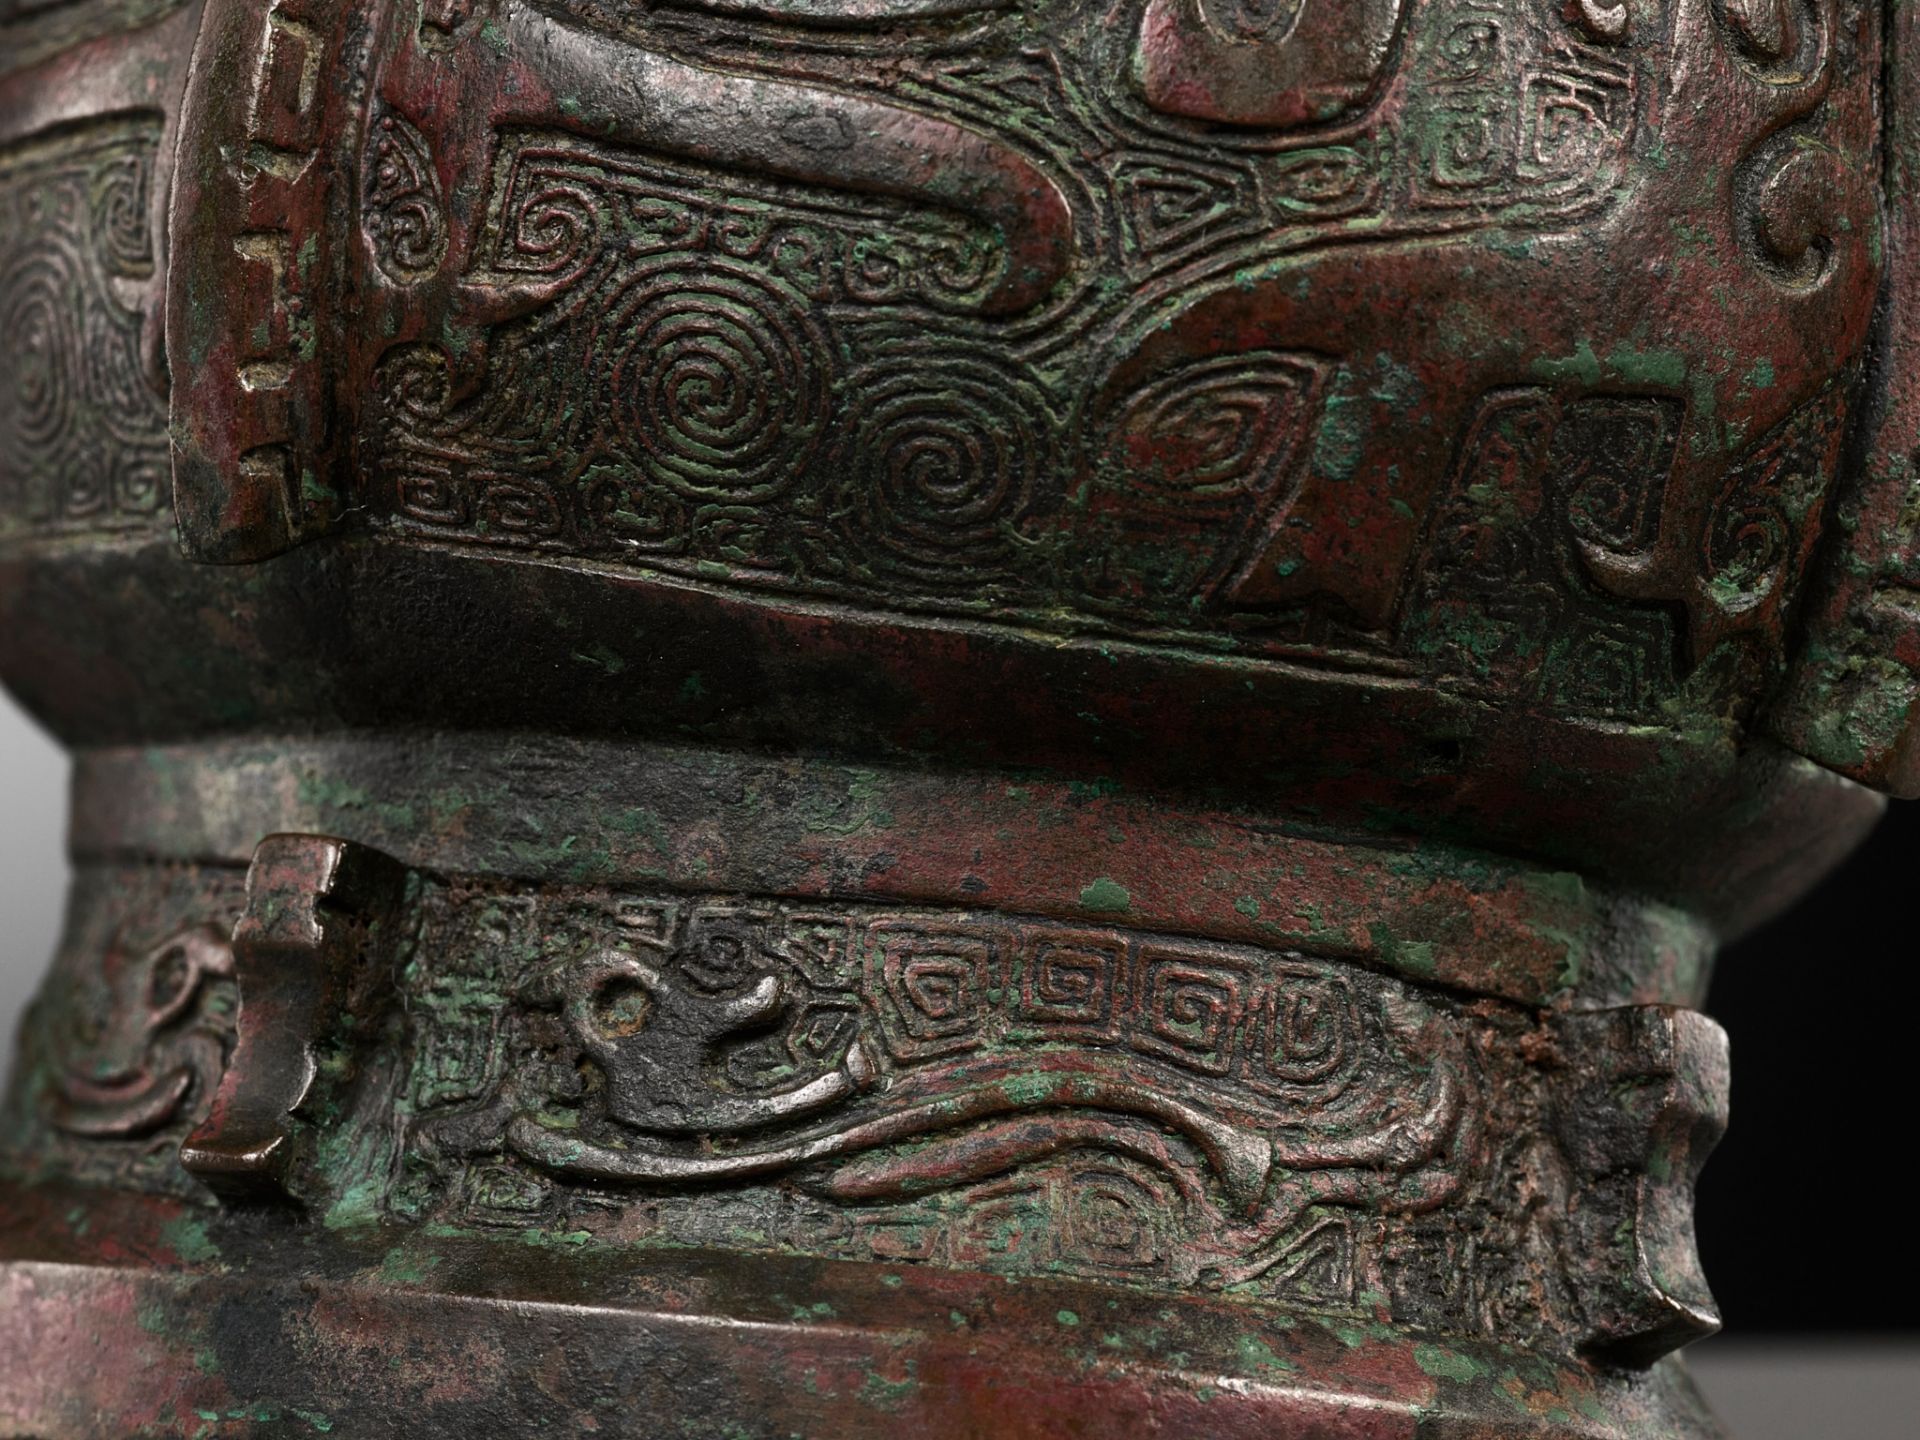 A RARE BRONZE RITUAL WINE VESSEL, ZHI, SHANG DYNASTY, CHINA, 13TH-12TH CENTURY BC - Image 7 of 25